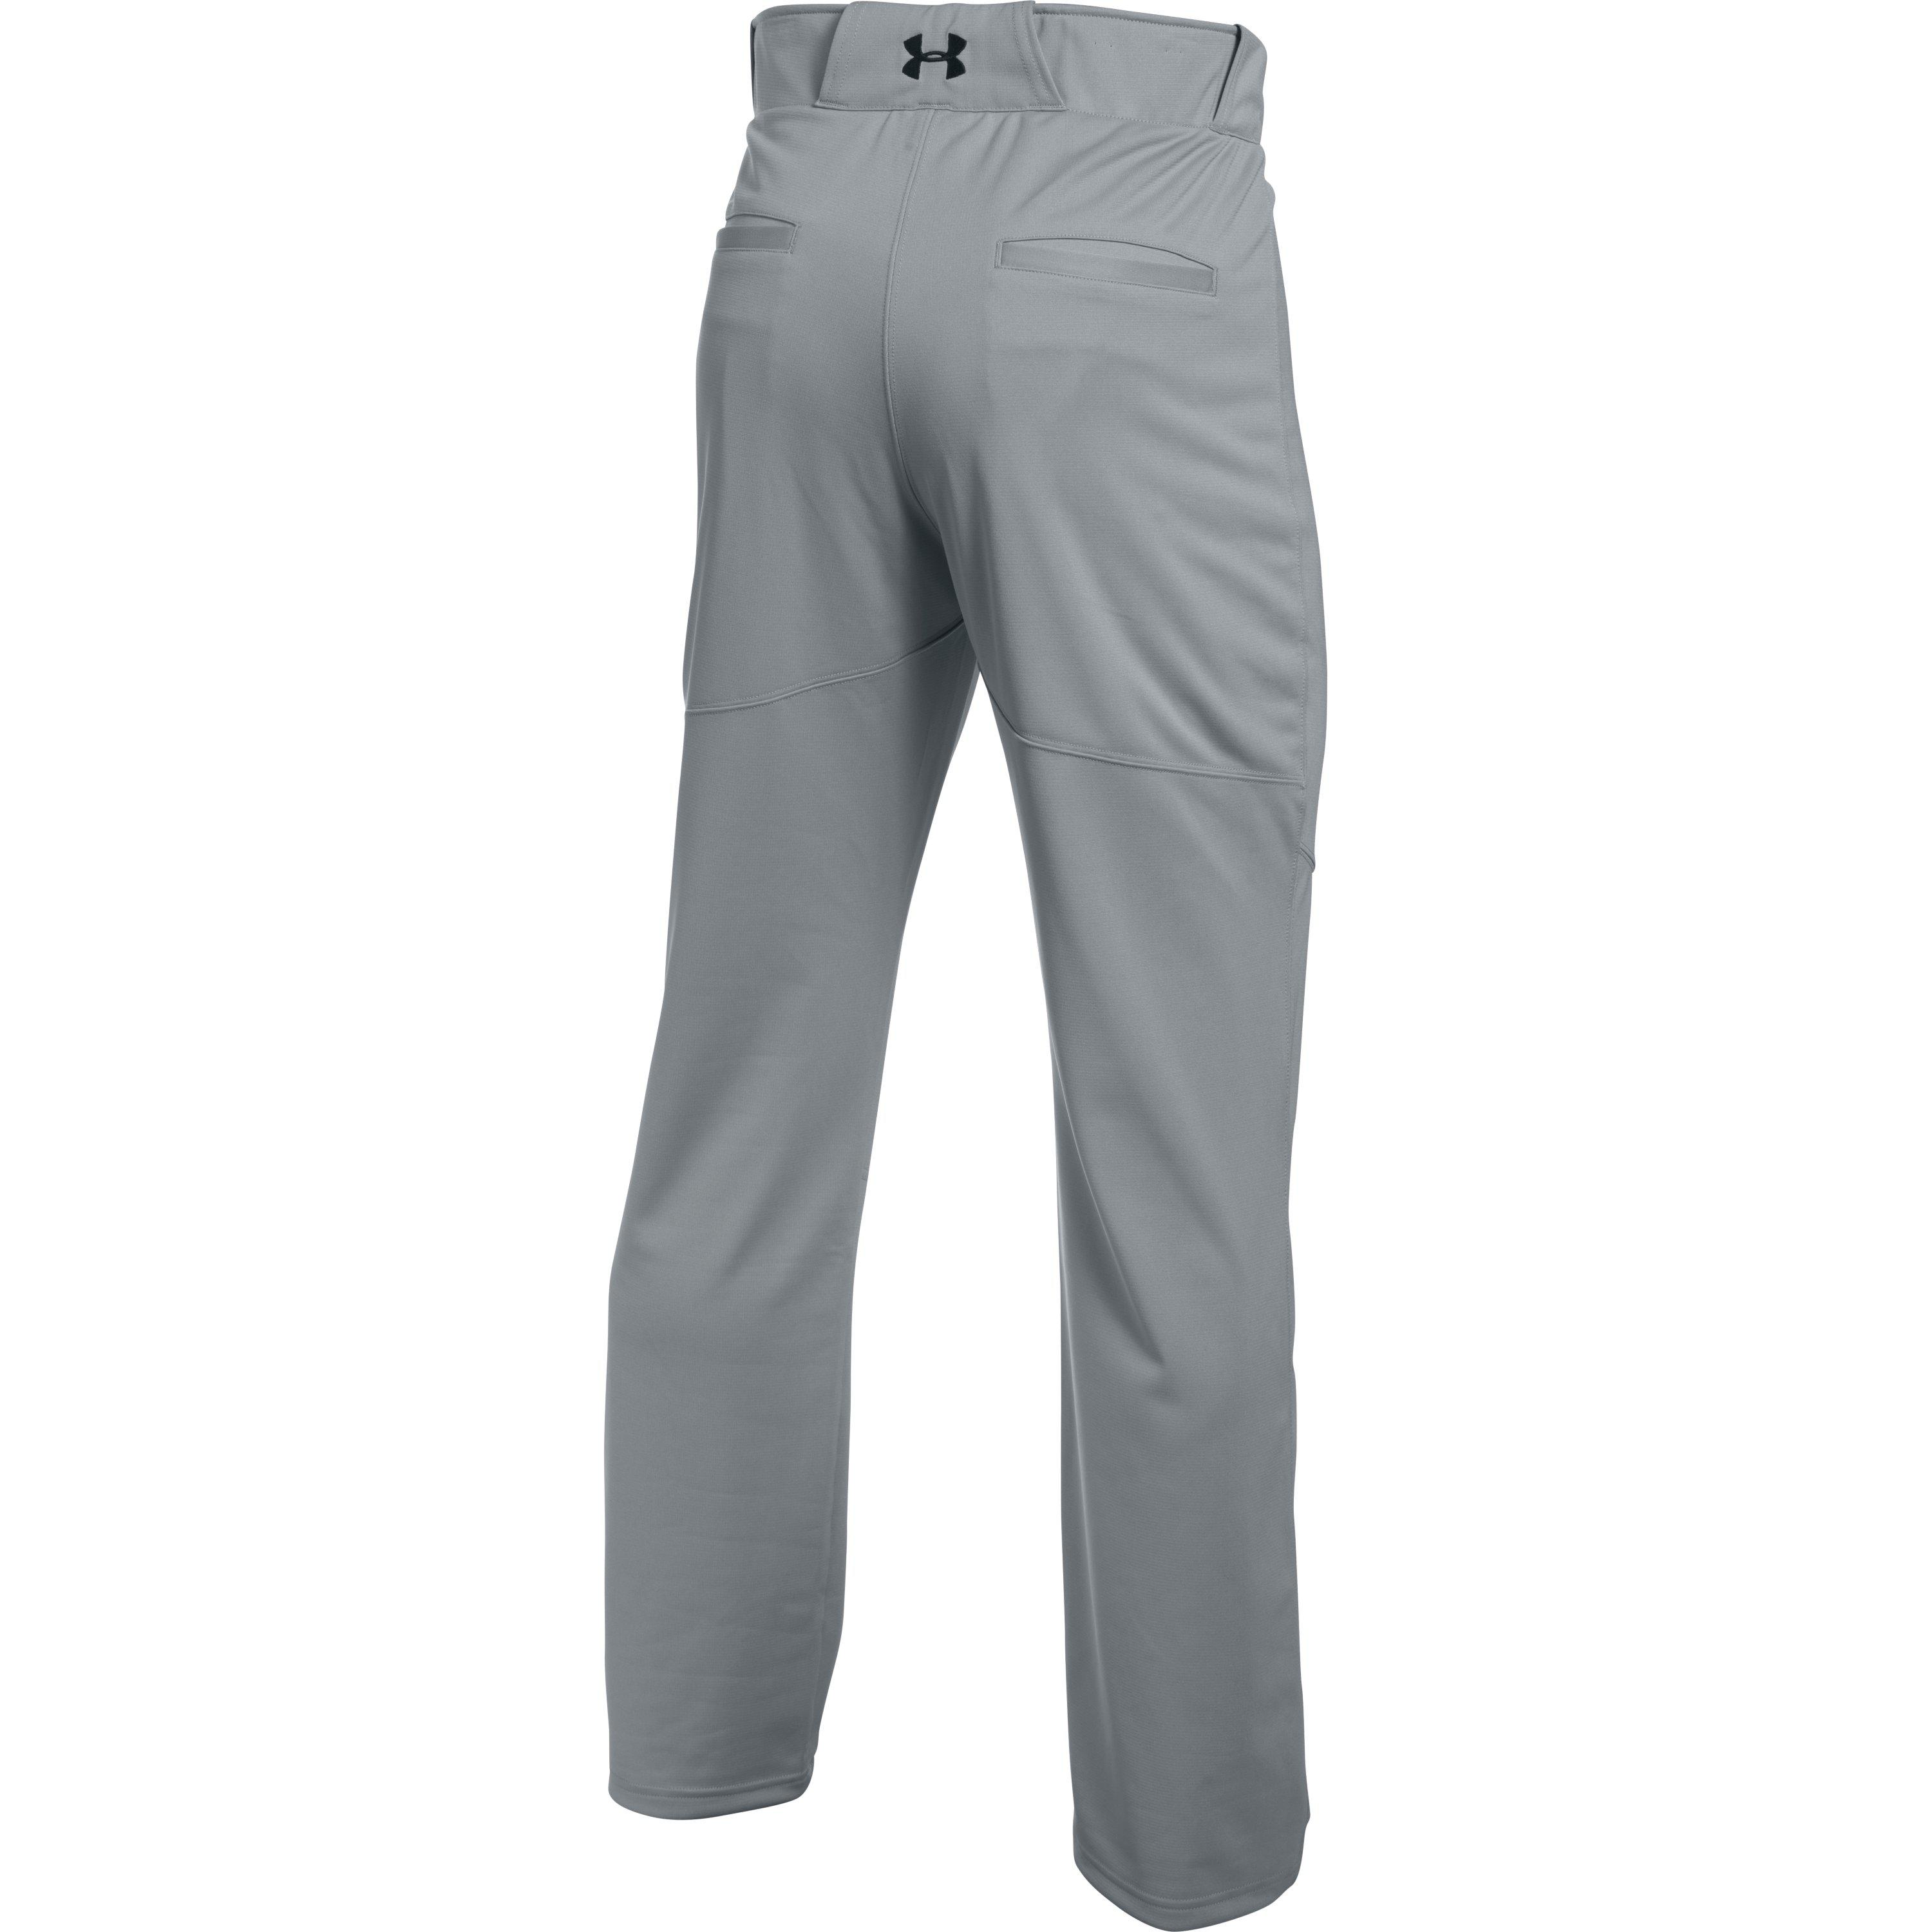 Under Armour Men's Ua Lead Off Baseball Pants in Gray for Men - Lyst